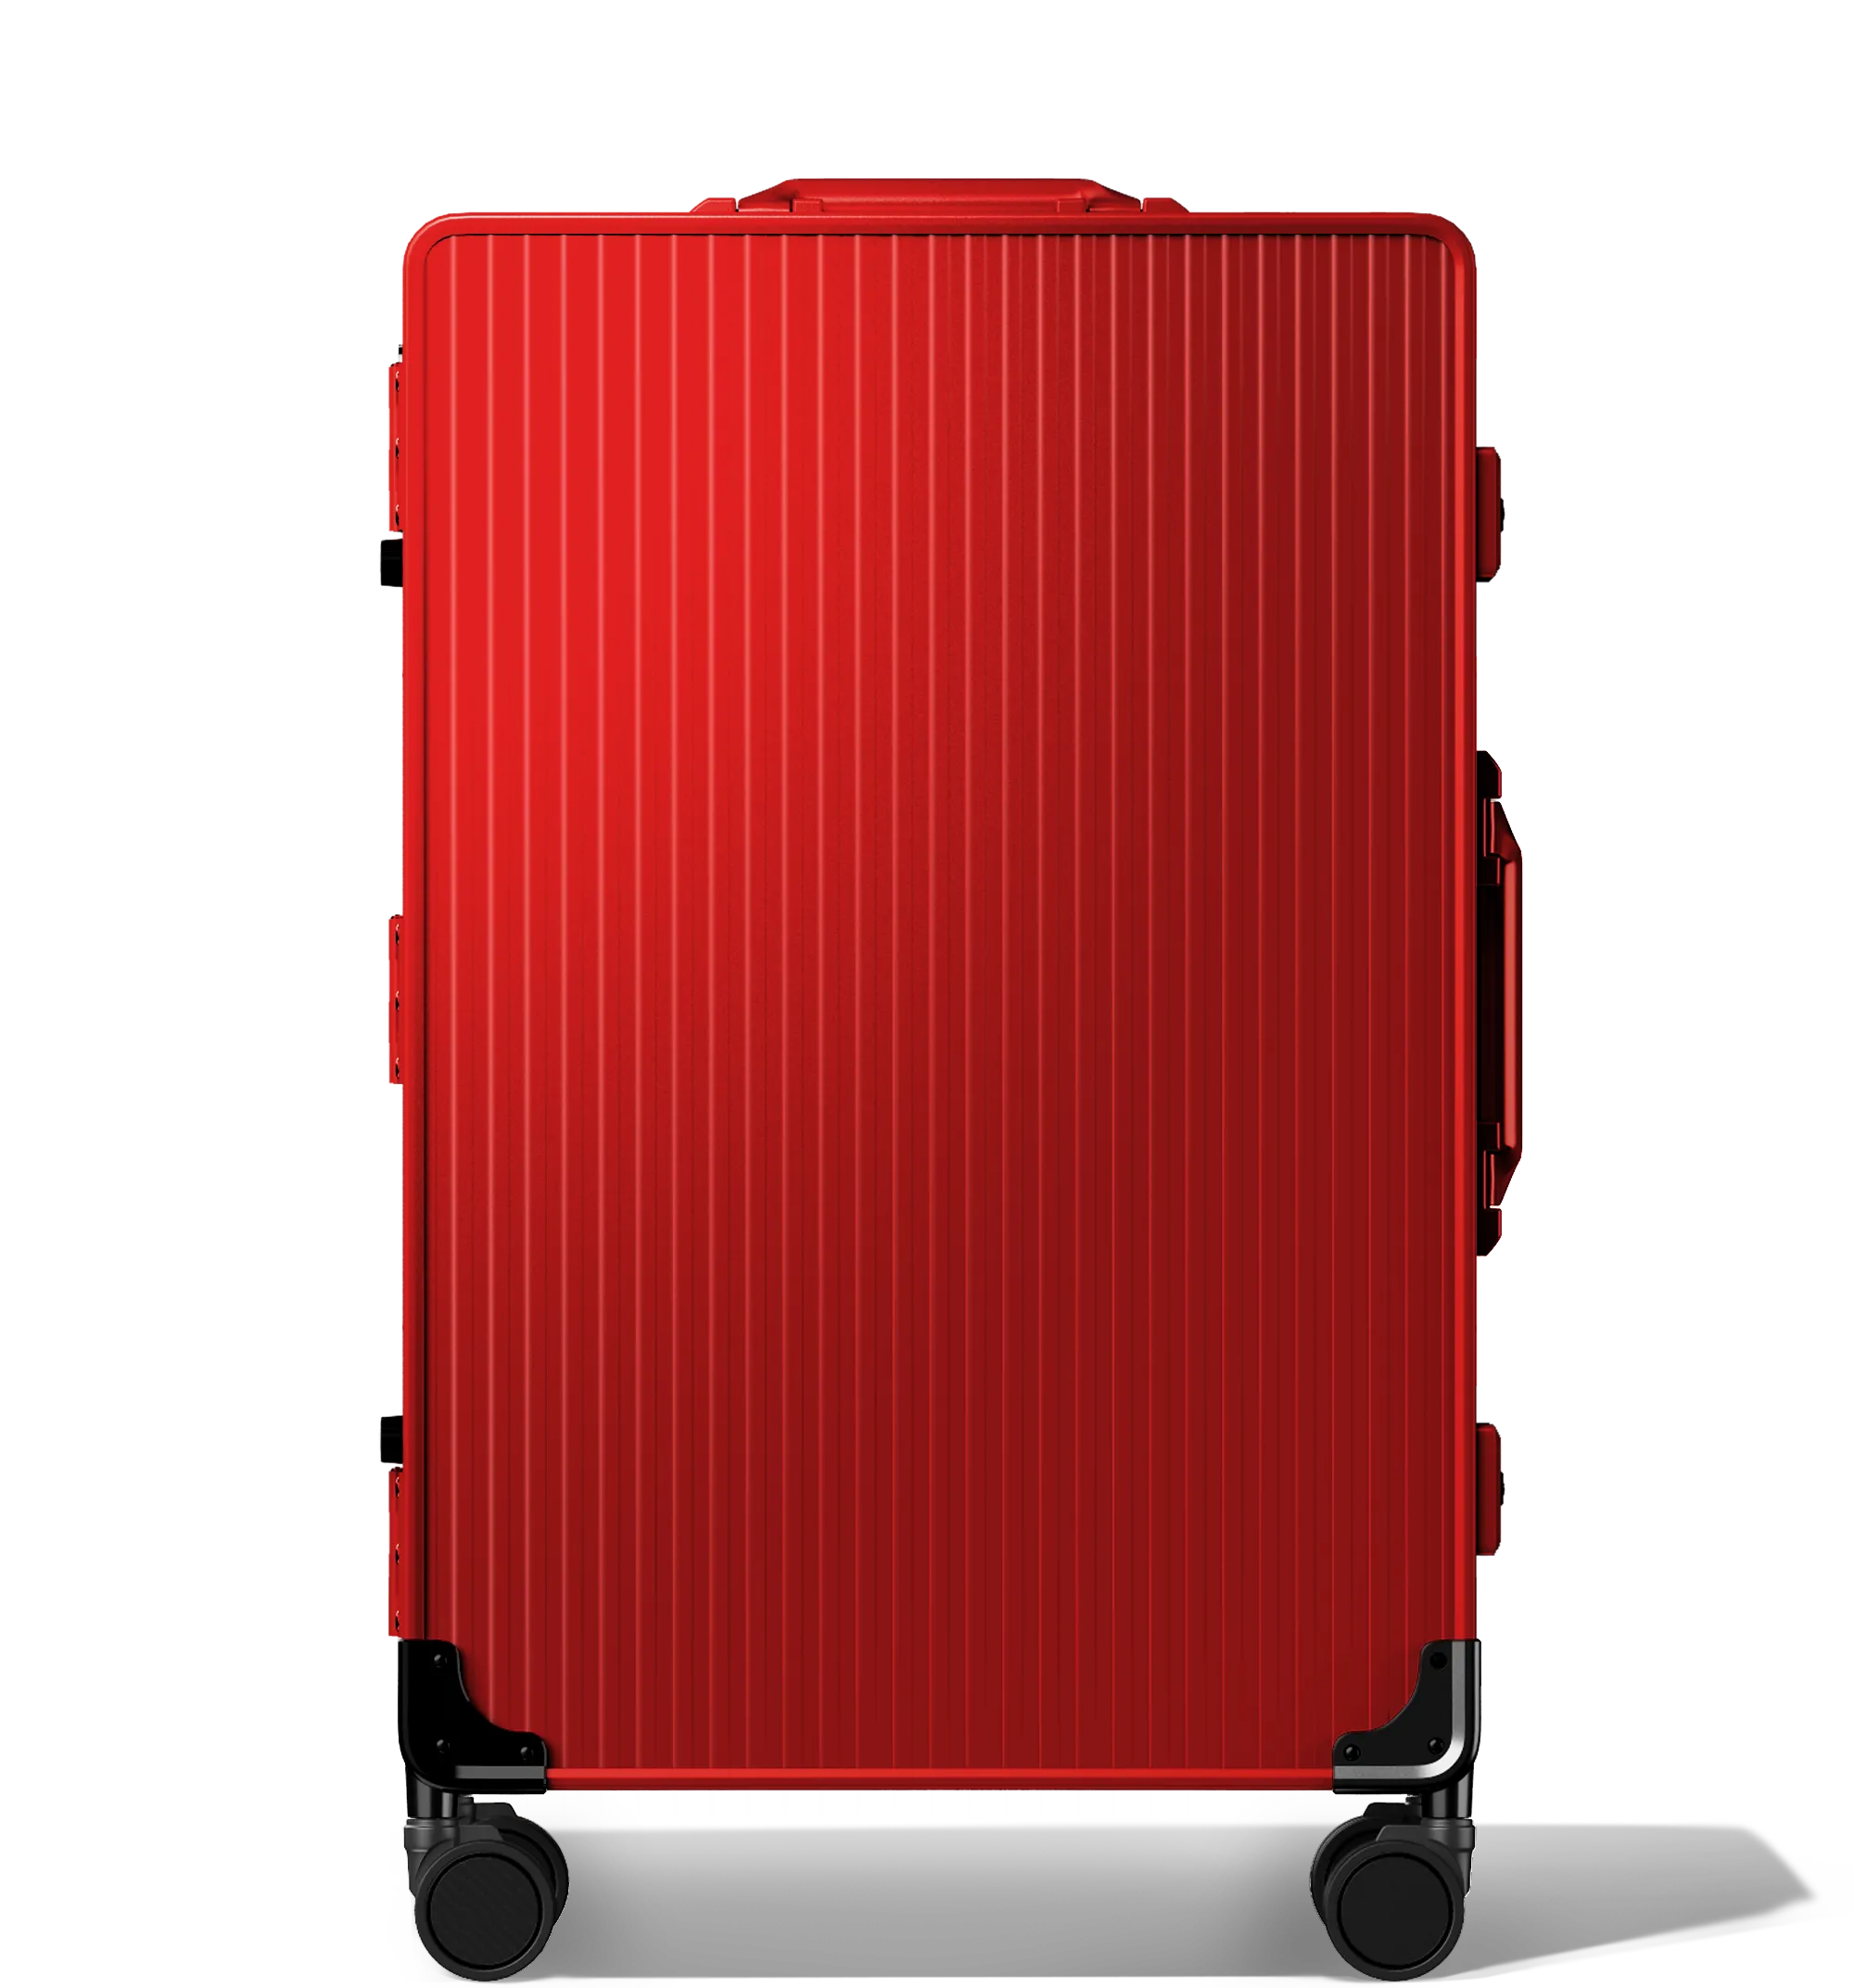 A vertical image of a Check-In 65/25 luggage , upright, red hard-shell aluminium Luggage with a grooved surface design and multi-directional wheels, shown against a white background.